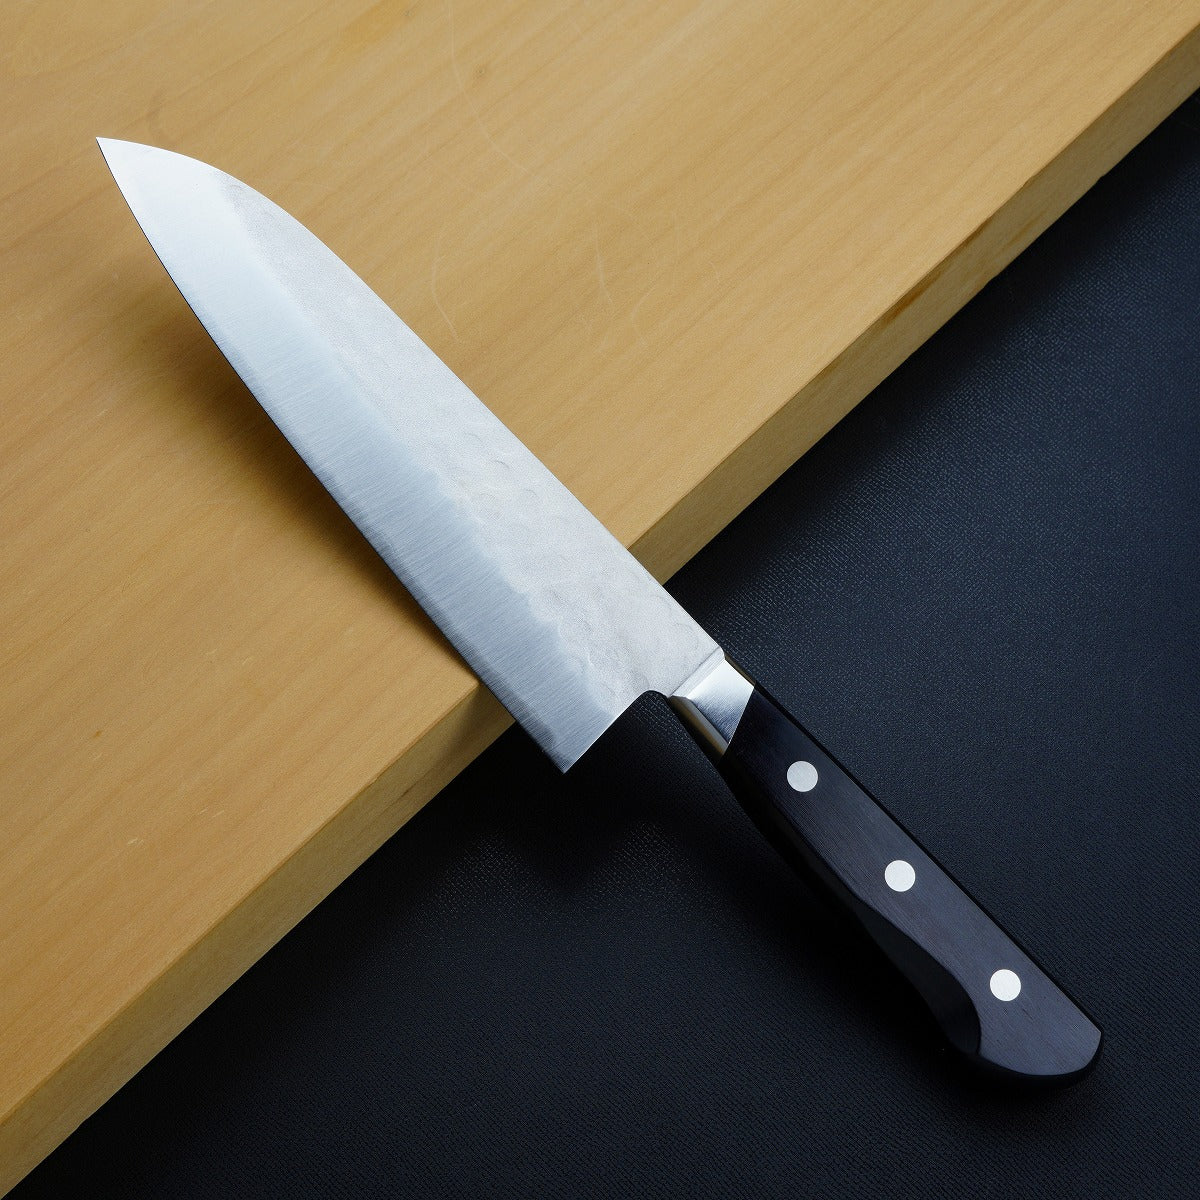 "HONMAMON" Santoku (Multi-Purpose Knife) Aogami Steel No.2 with Stainless Steel Nashiji and Hammered Pattern,180mm